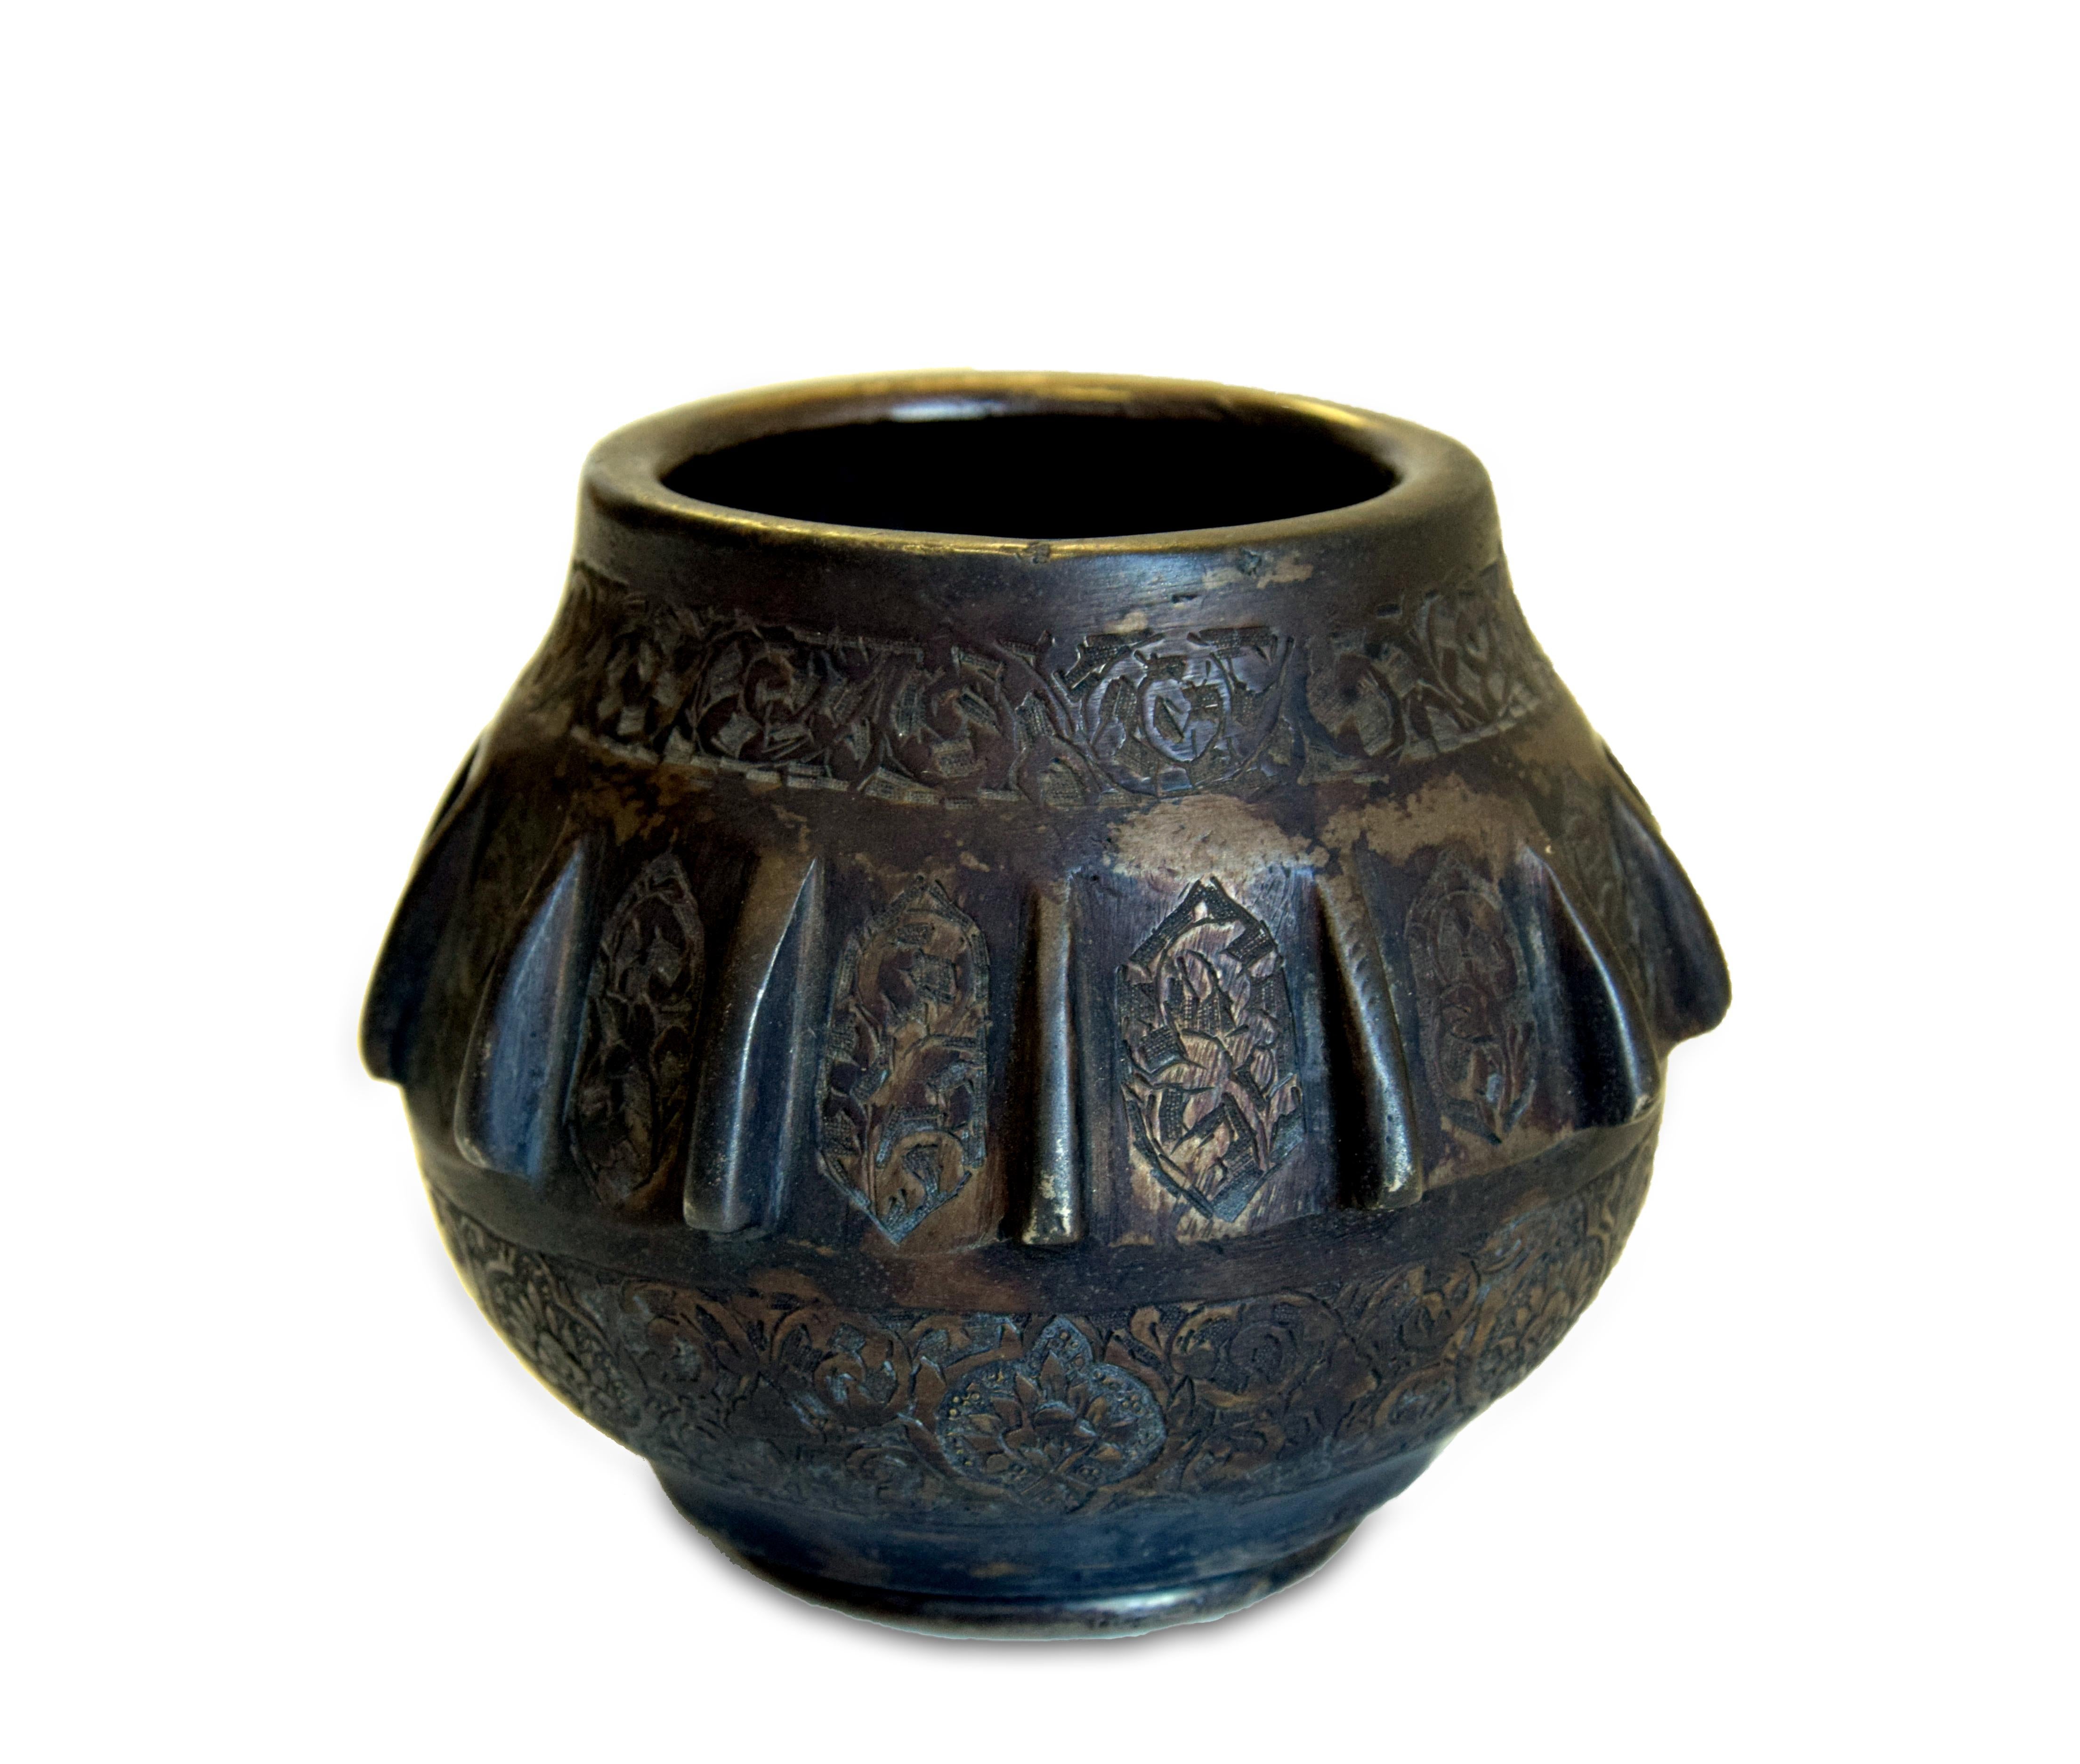 Indian bronze bowl is an original decorative object realized in India in the mid-19th century.

Bronze.

Excellent conditions.

Original manufact realized with a spherical body adorned with bands of floral and vegetable developments.

This